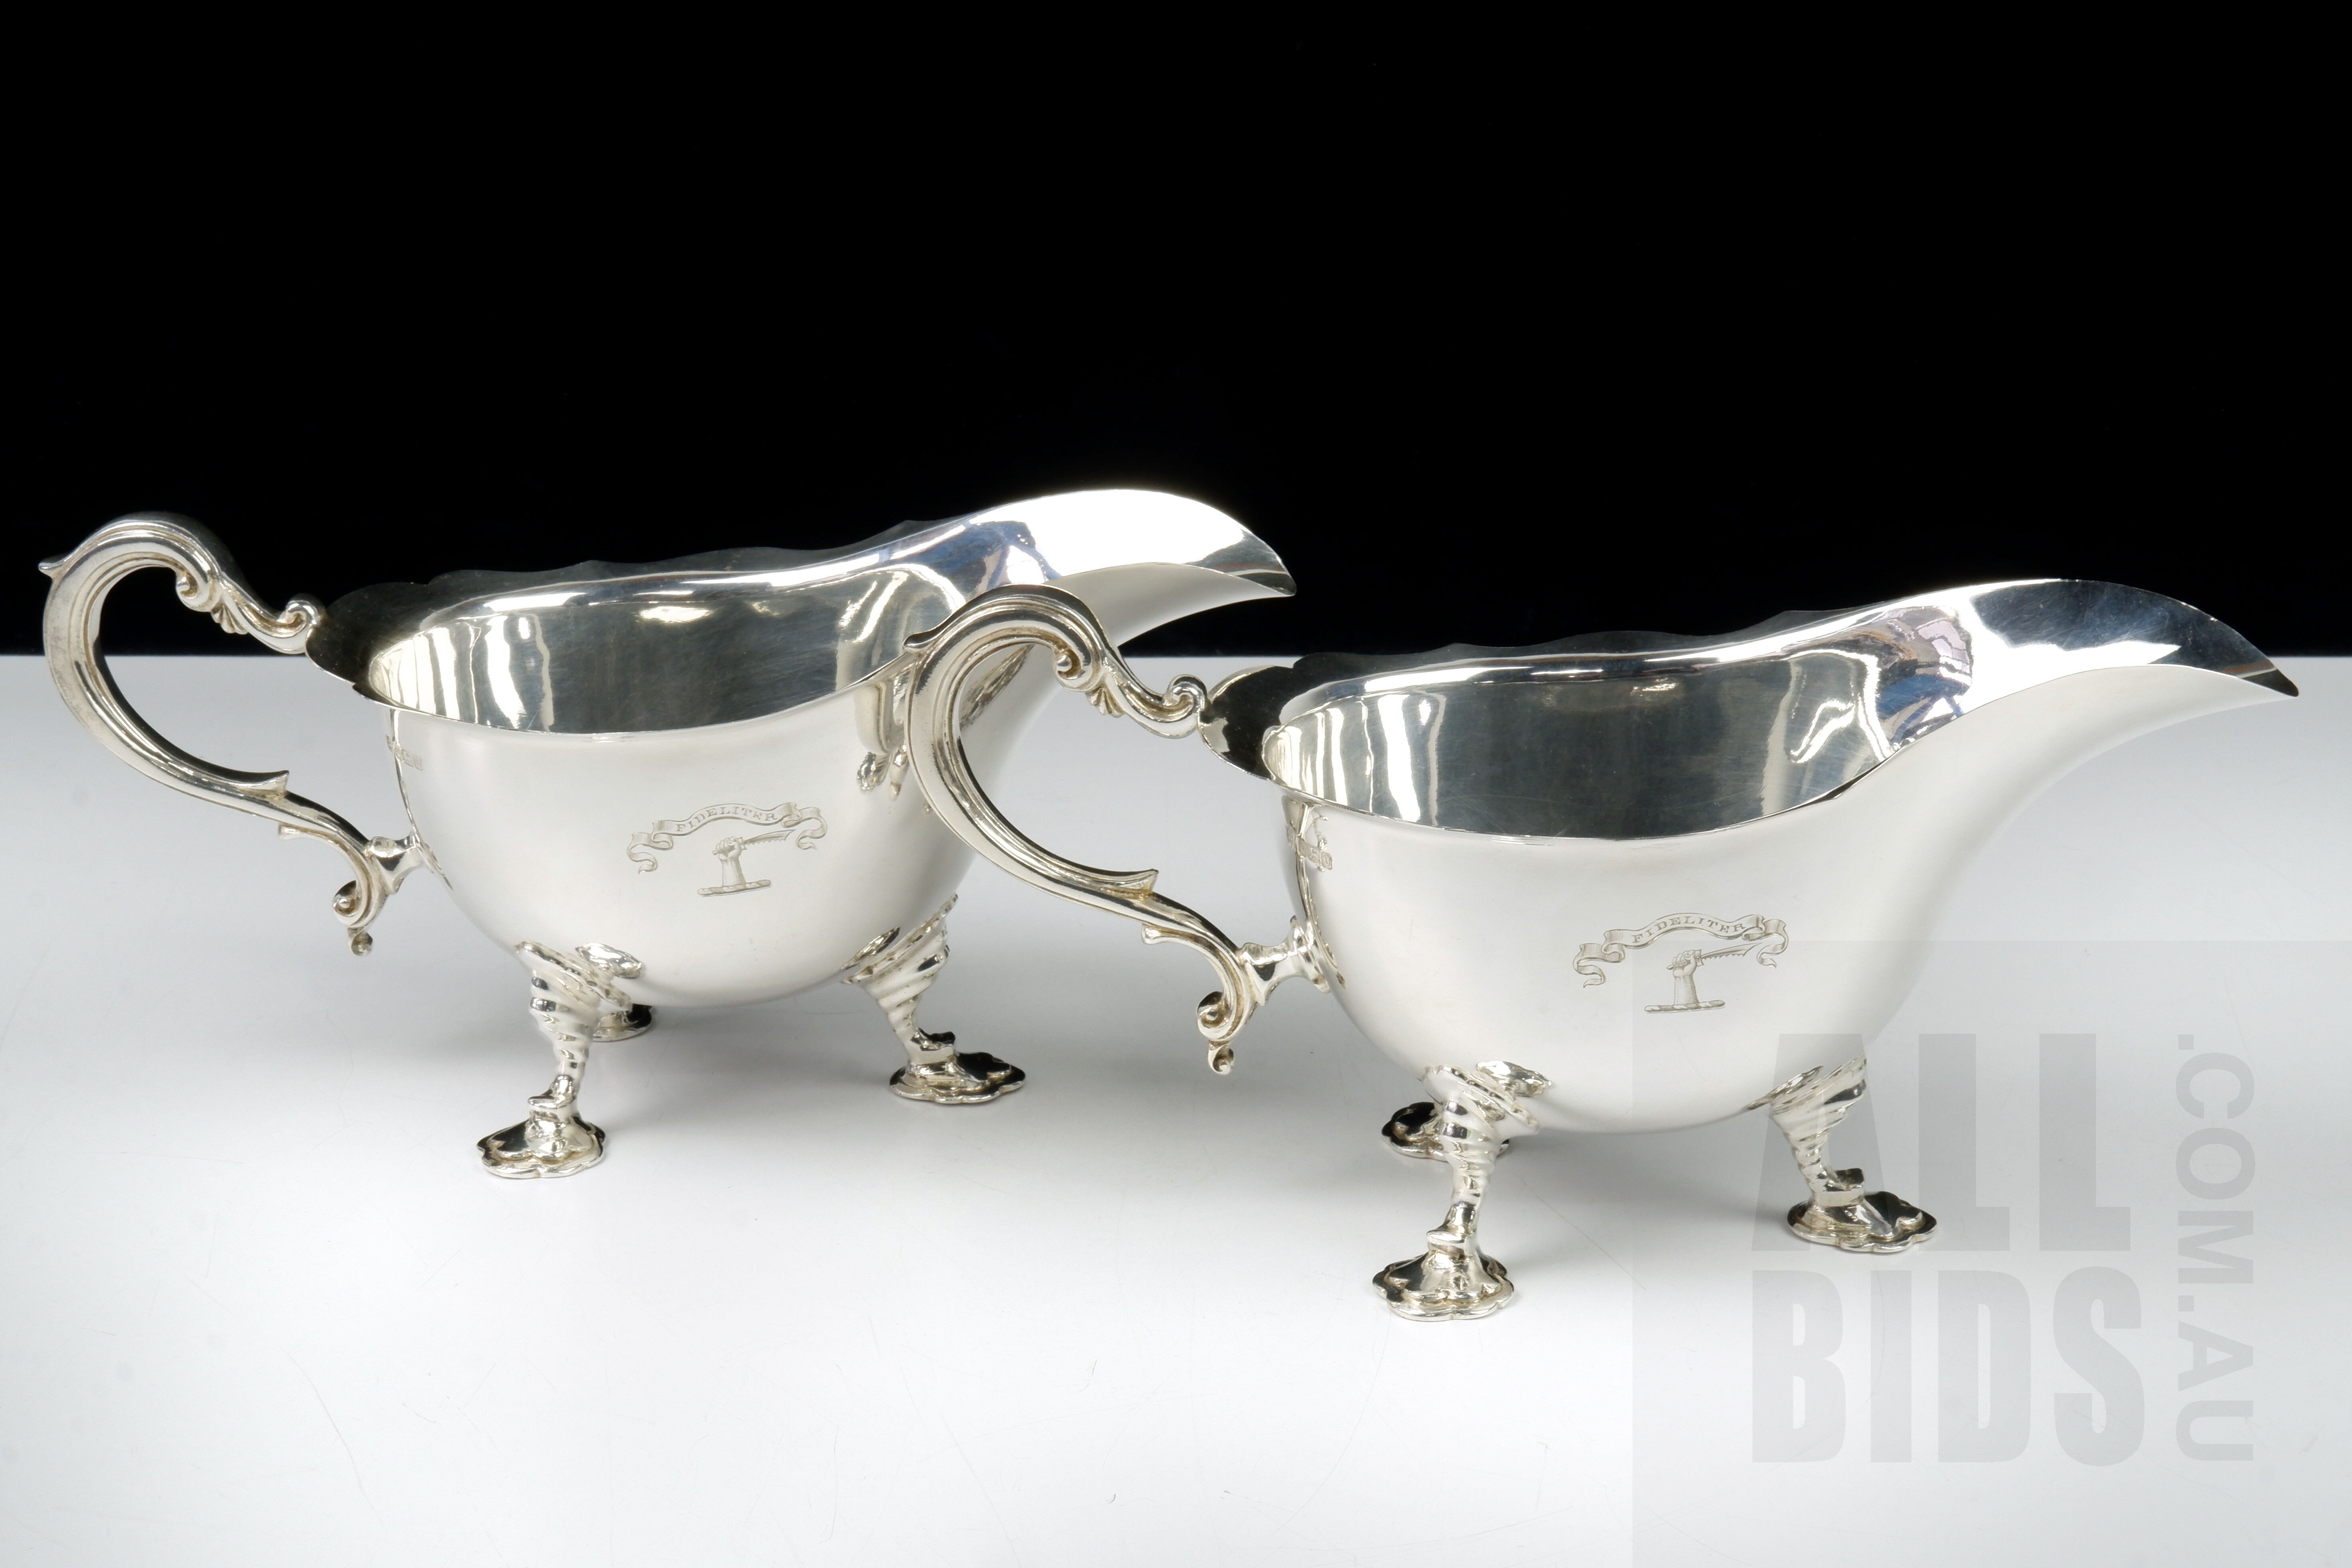 'Pair of Good Edwardian Sterling Silver Gravy Boats with Engraved Armorial Crest, J & J Maxfield, Sheffield, 1906, 896g'